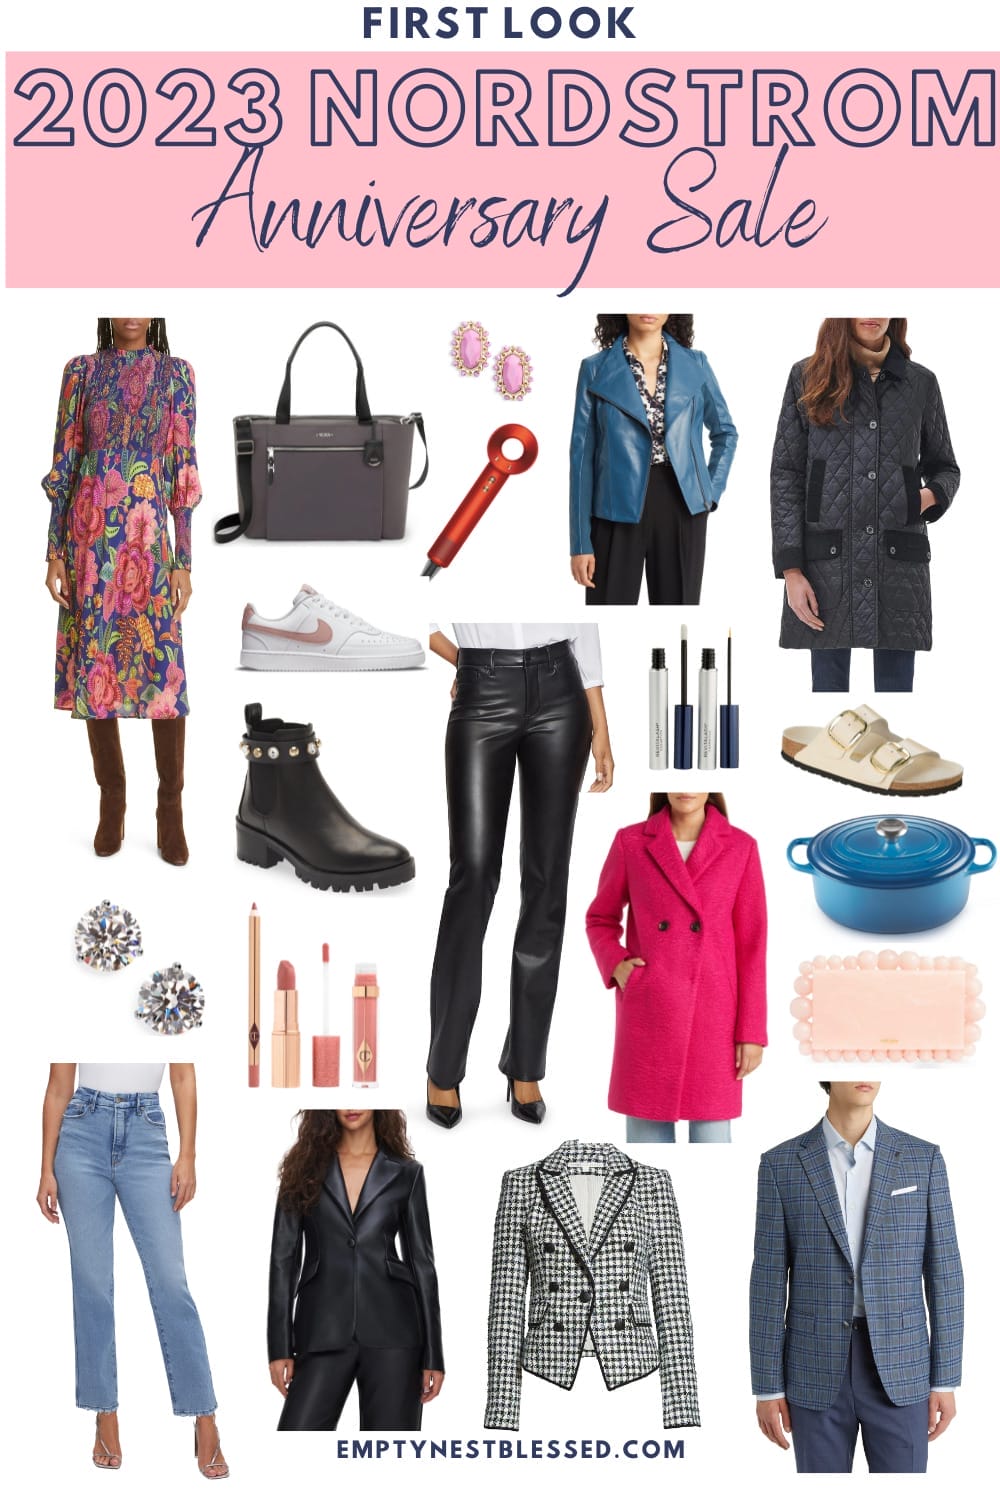 How to Shop the 2023 Nordstrom Anniversary Sale (Insider Tips & Tricks)